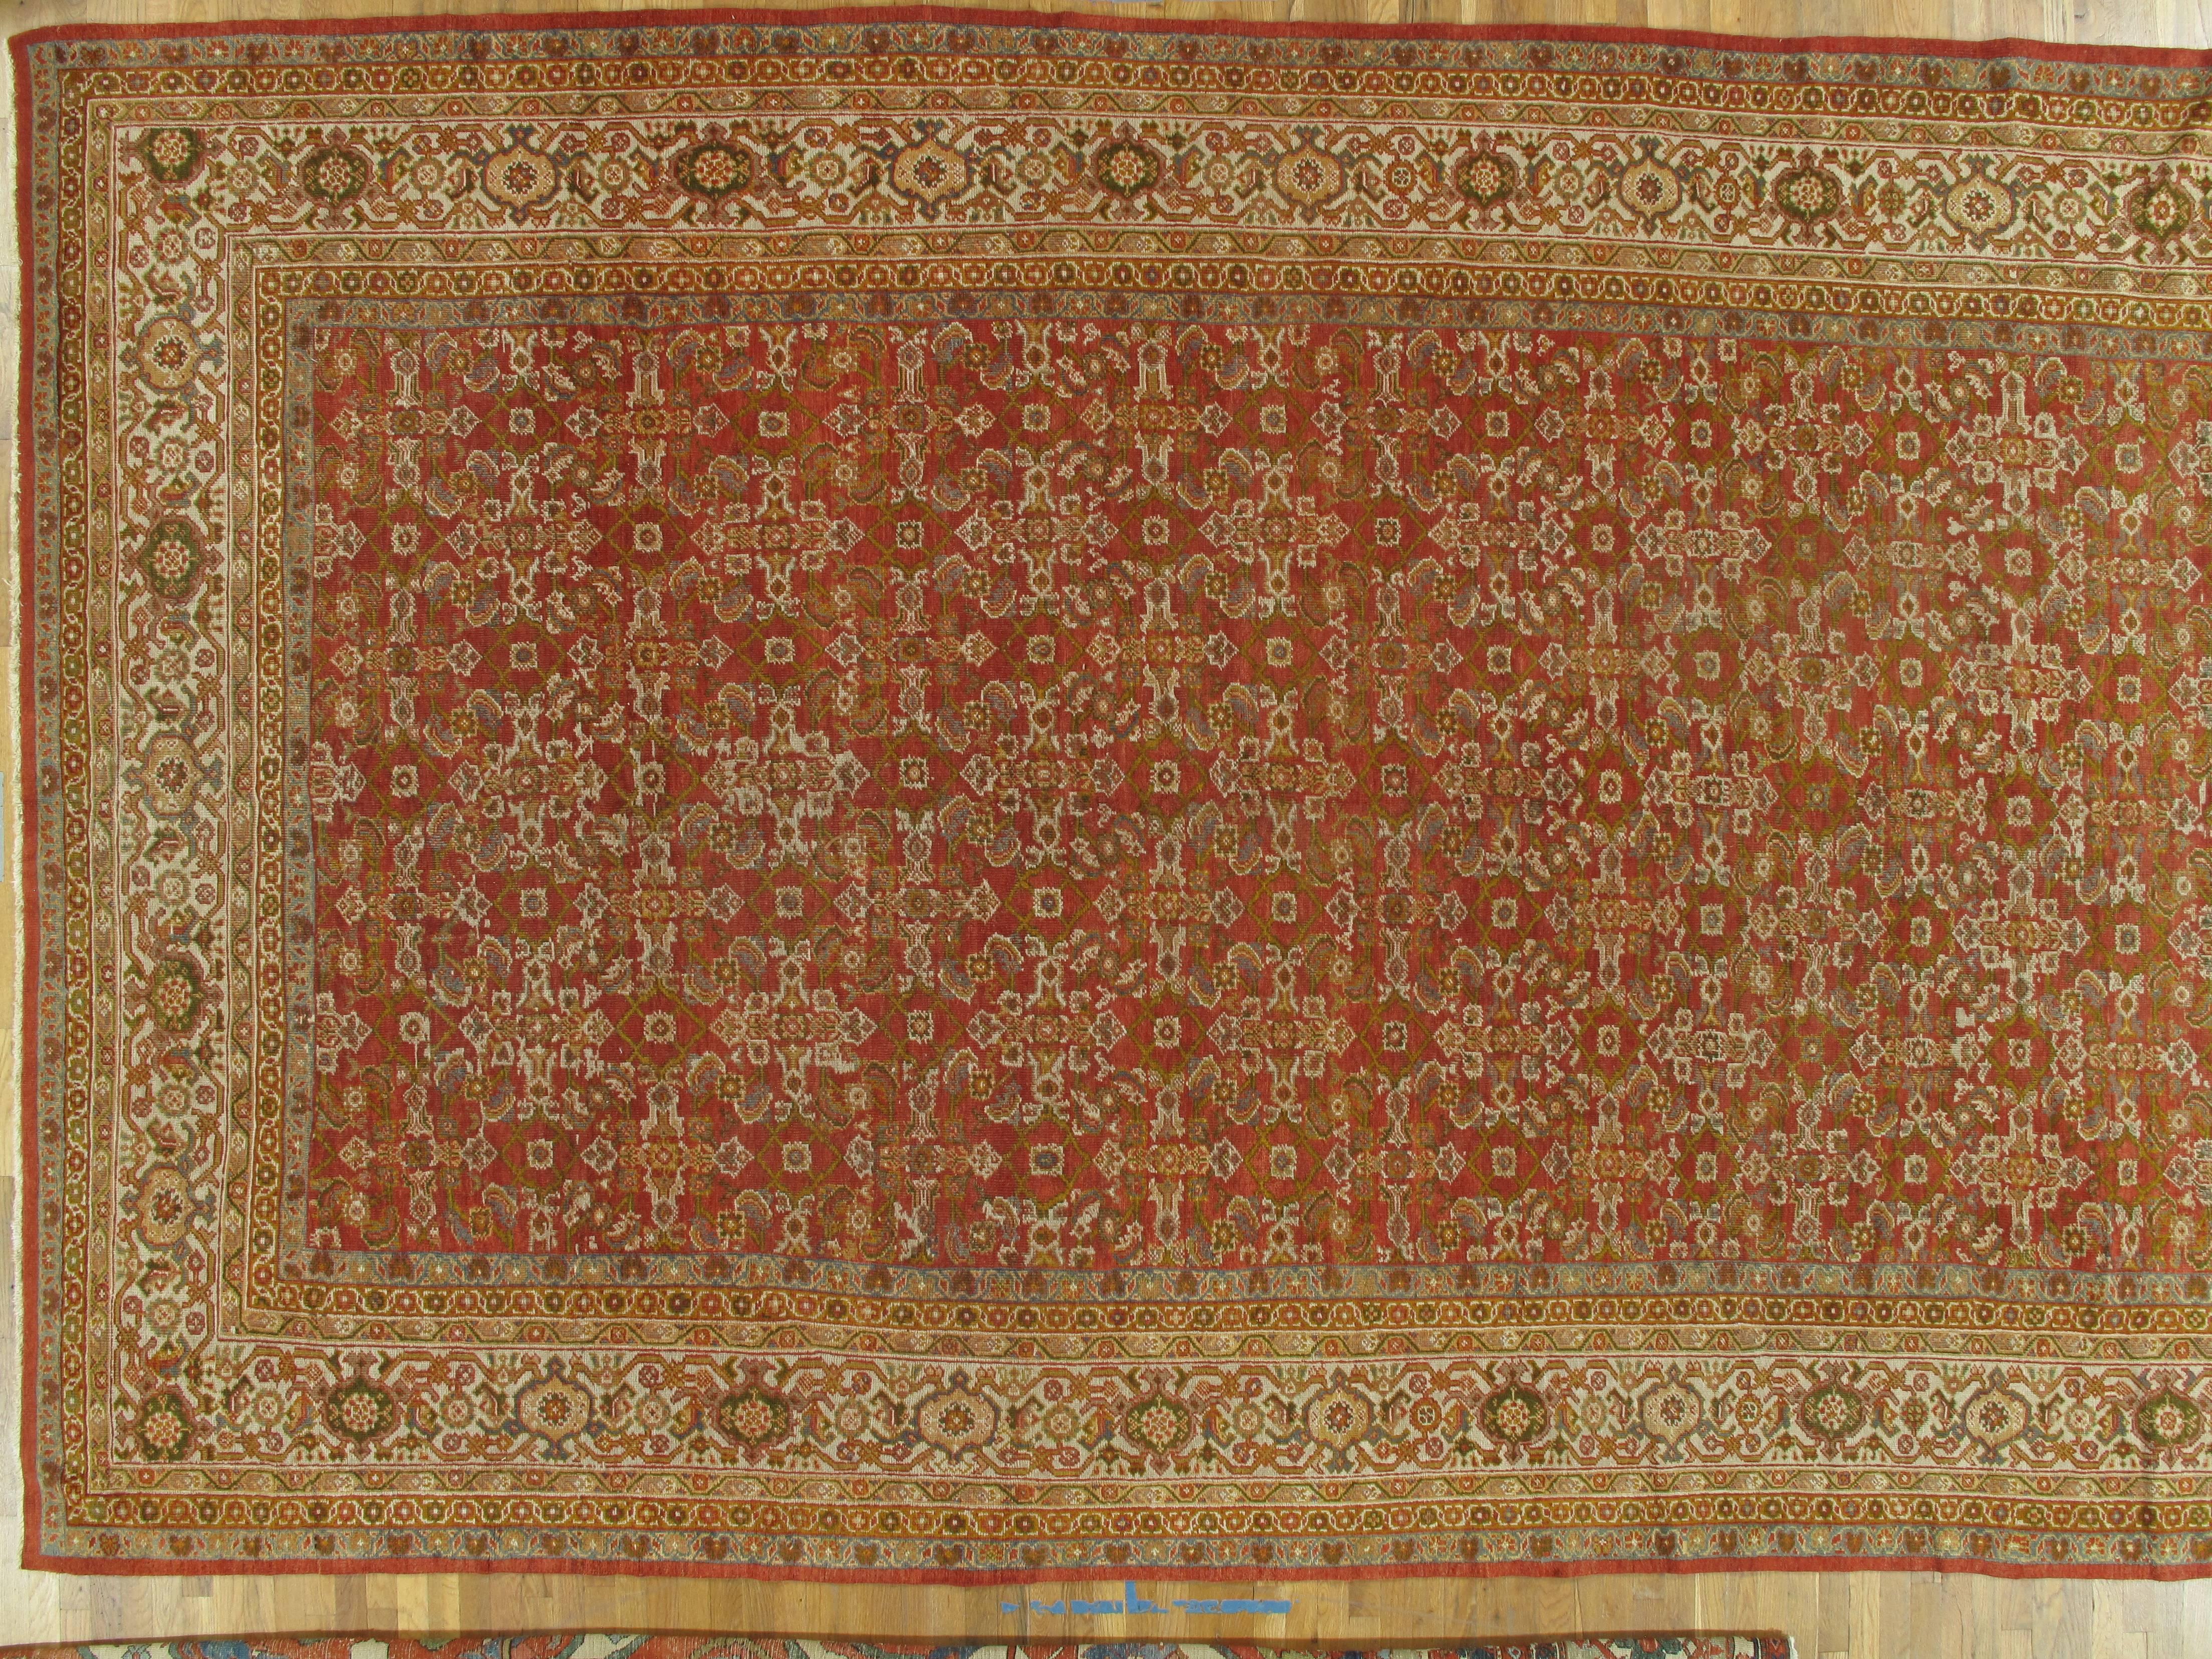 Hand-Knotted Antique Sultanabad Carpet, Handmade Wool Carpet, Ivory, Rust, Green